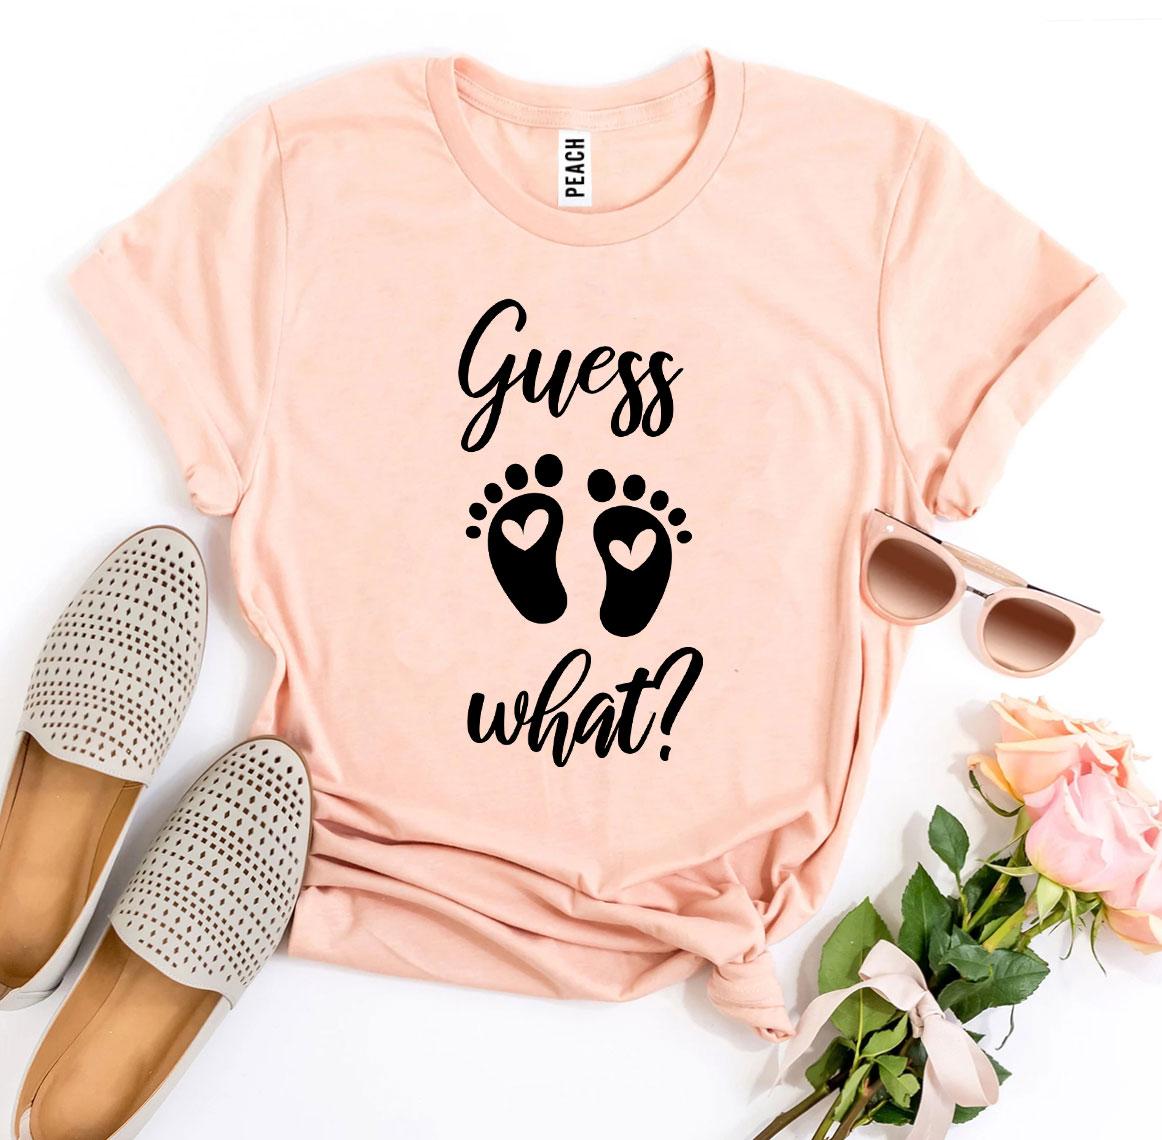 Guess What? T-shirt